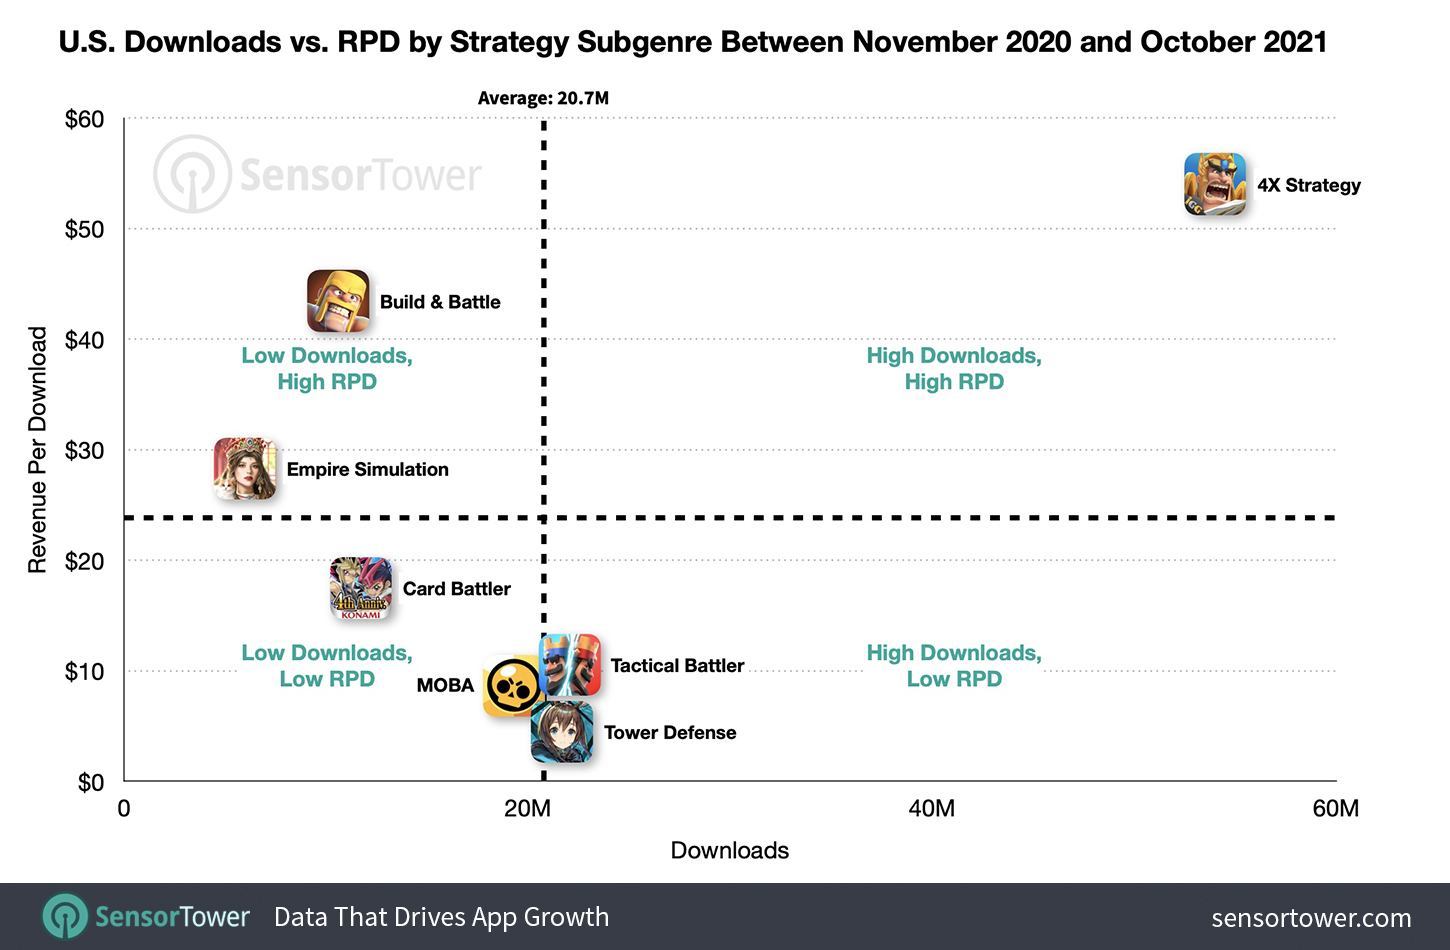 U.S. Downloads Vs. RPD by Strategy Subgenre Between November 2020 and October 2021